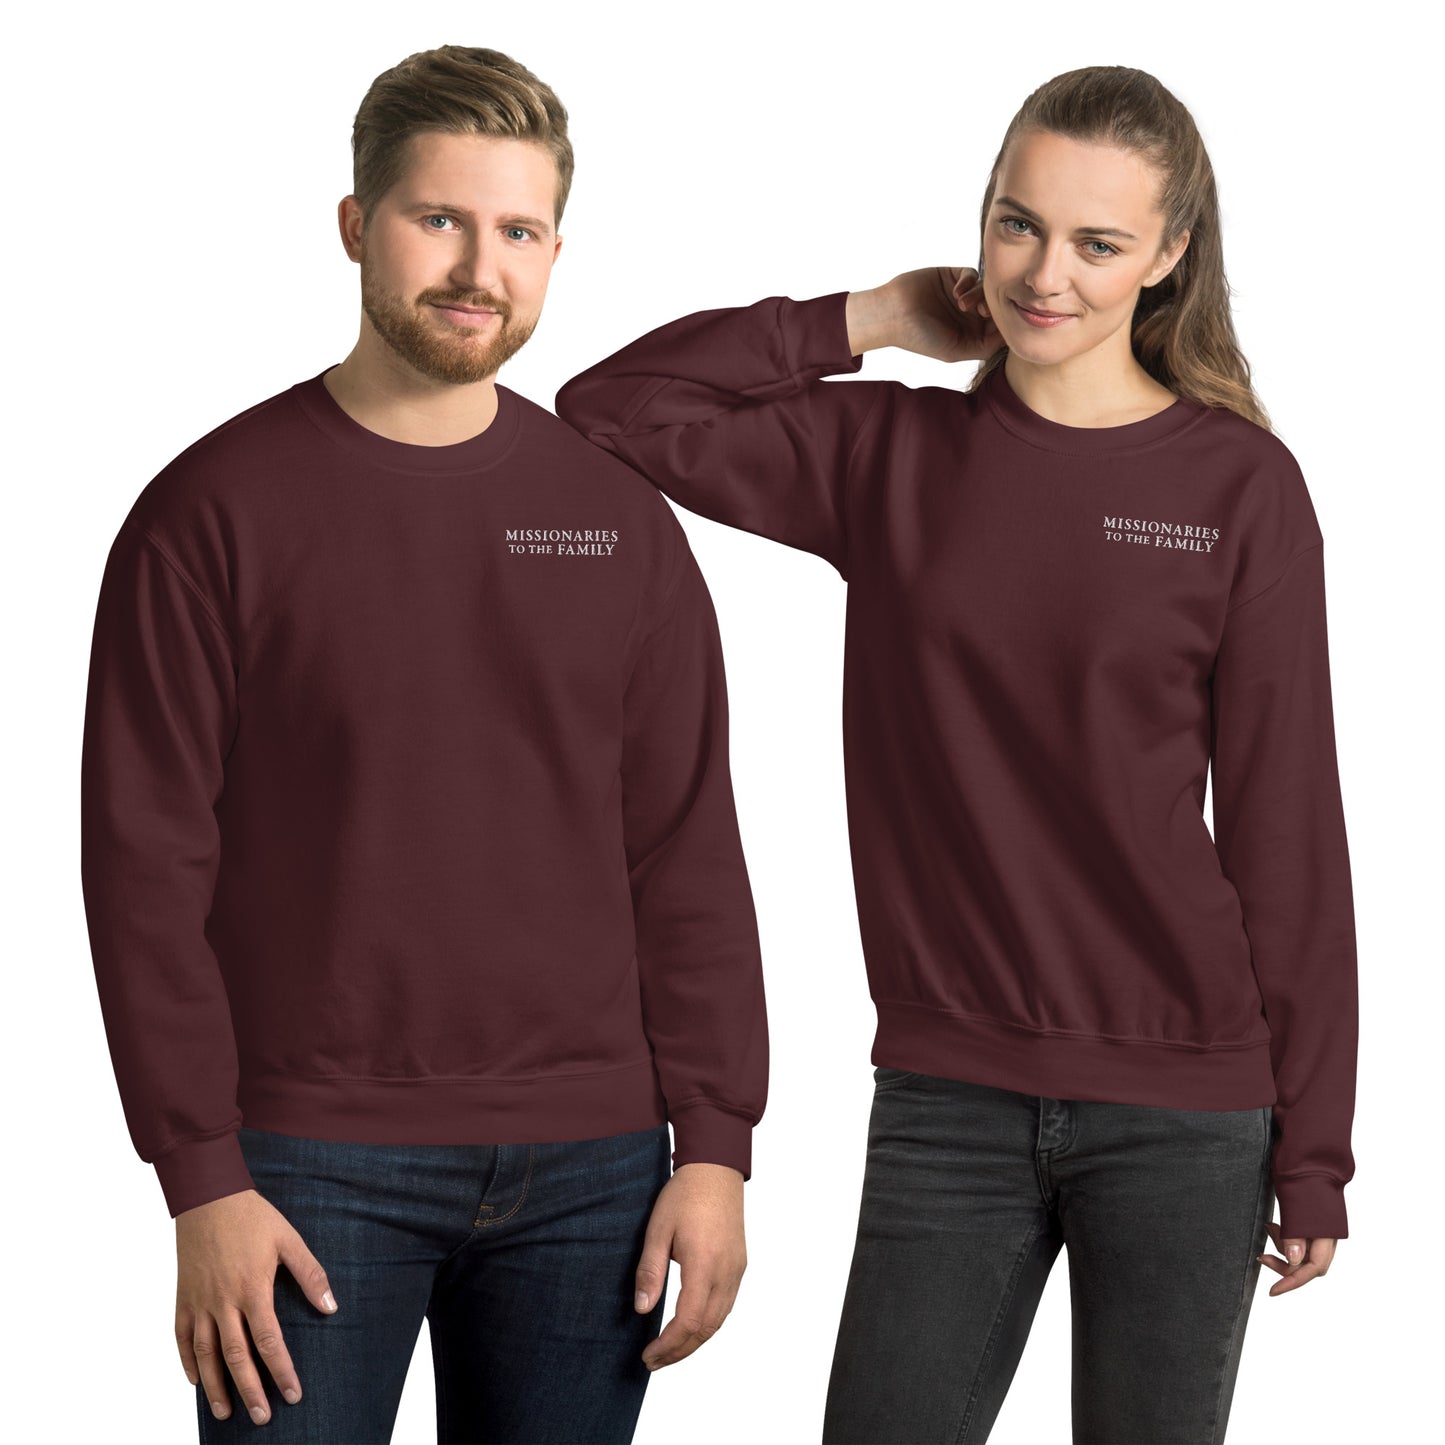 Missionaries to the Family Embroidered Unisex Sweatshirt